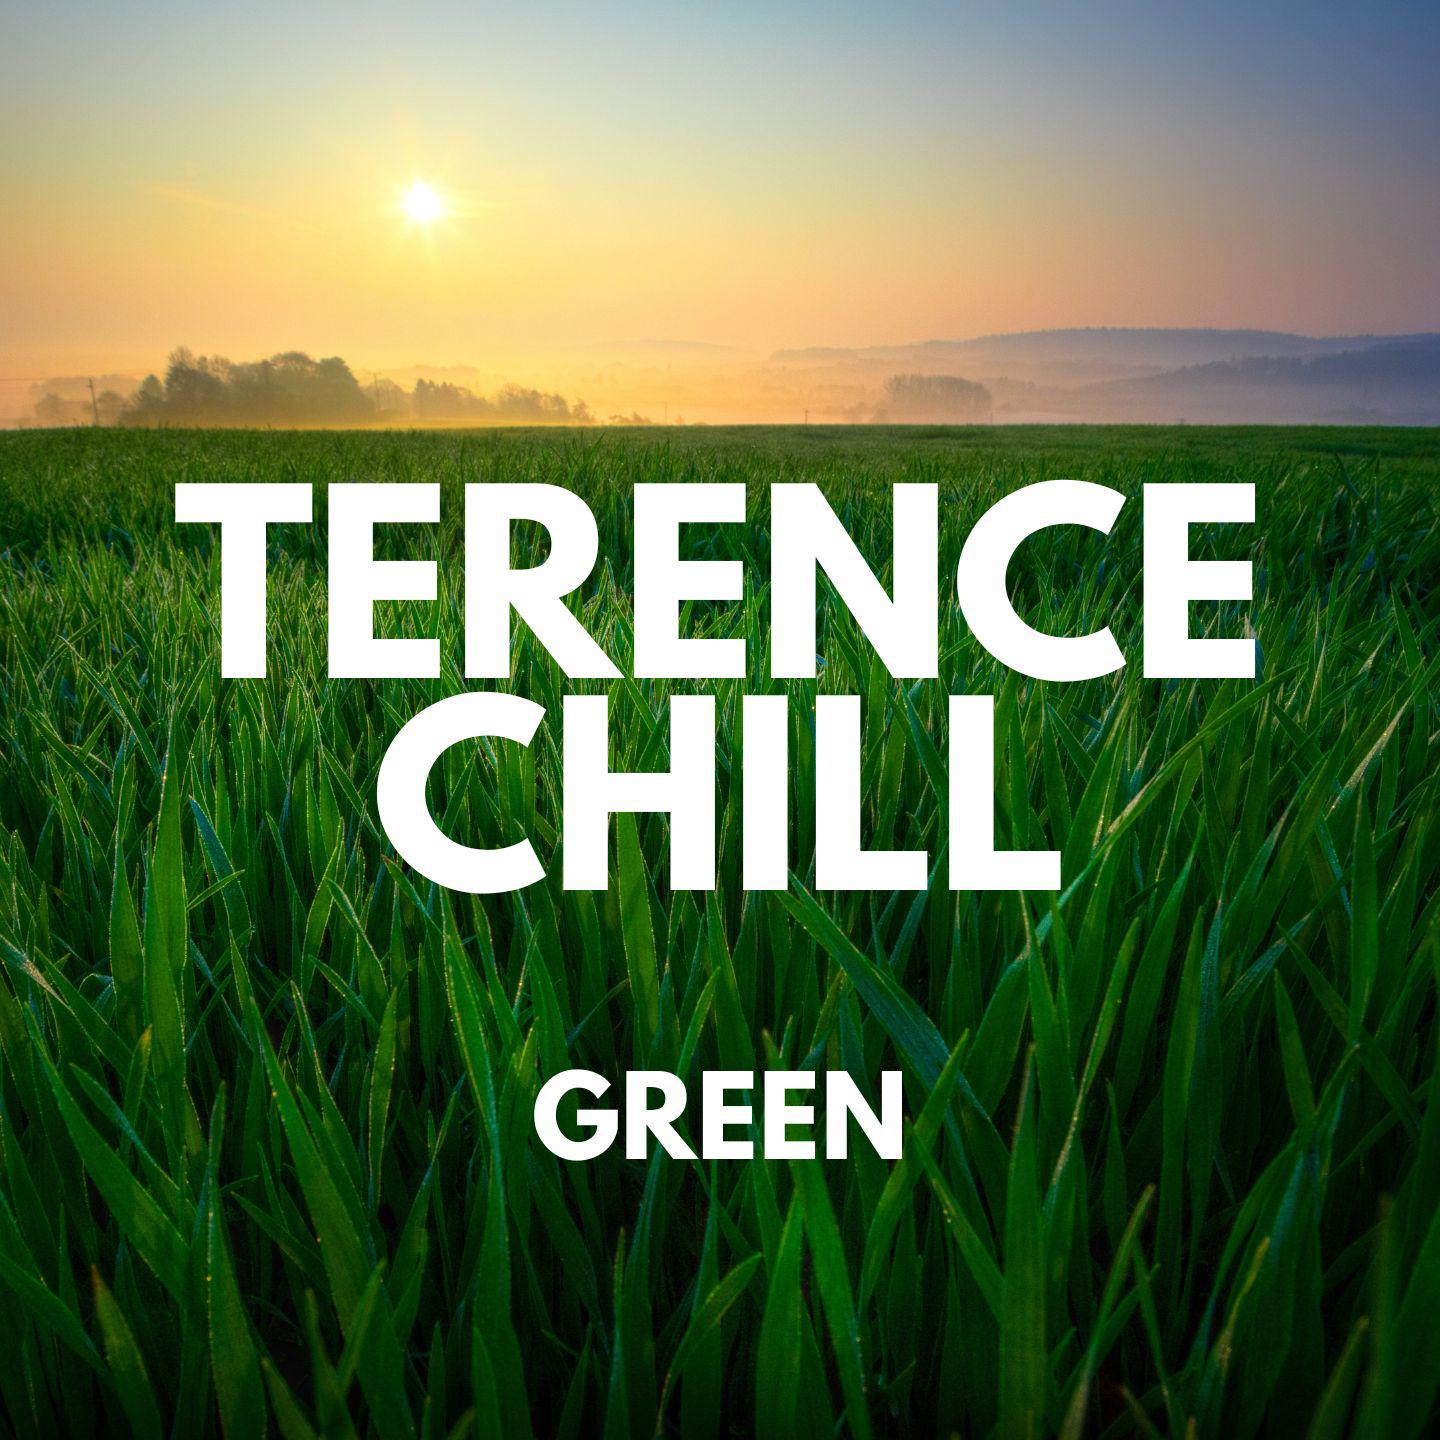 Terence Chill - Claudette Ebonywood